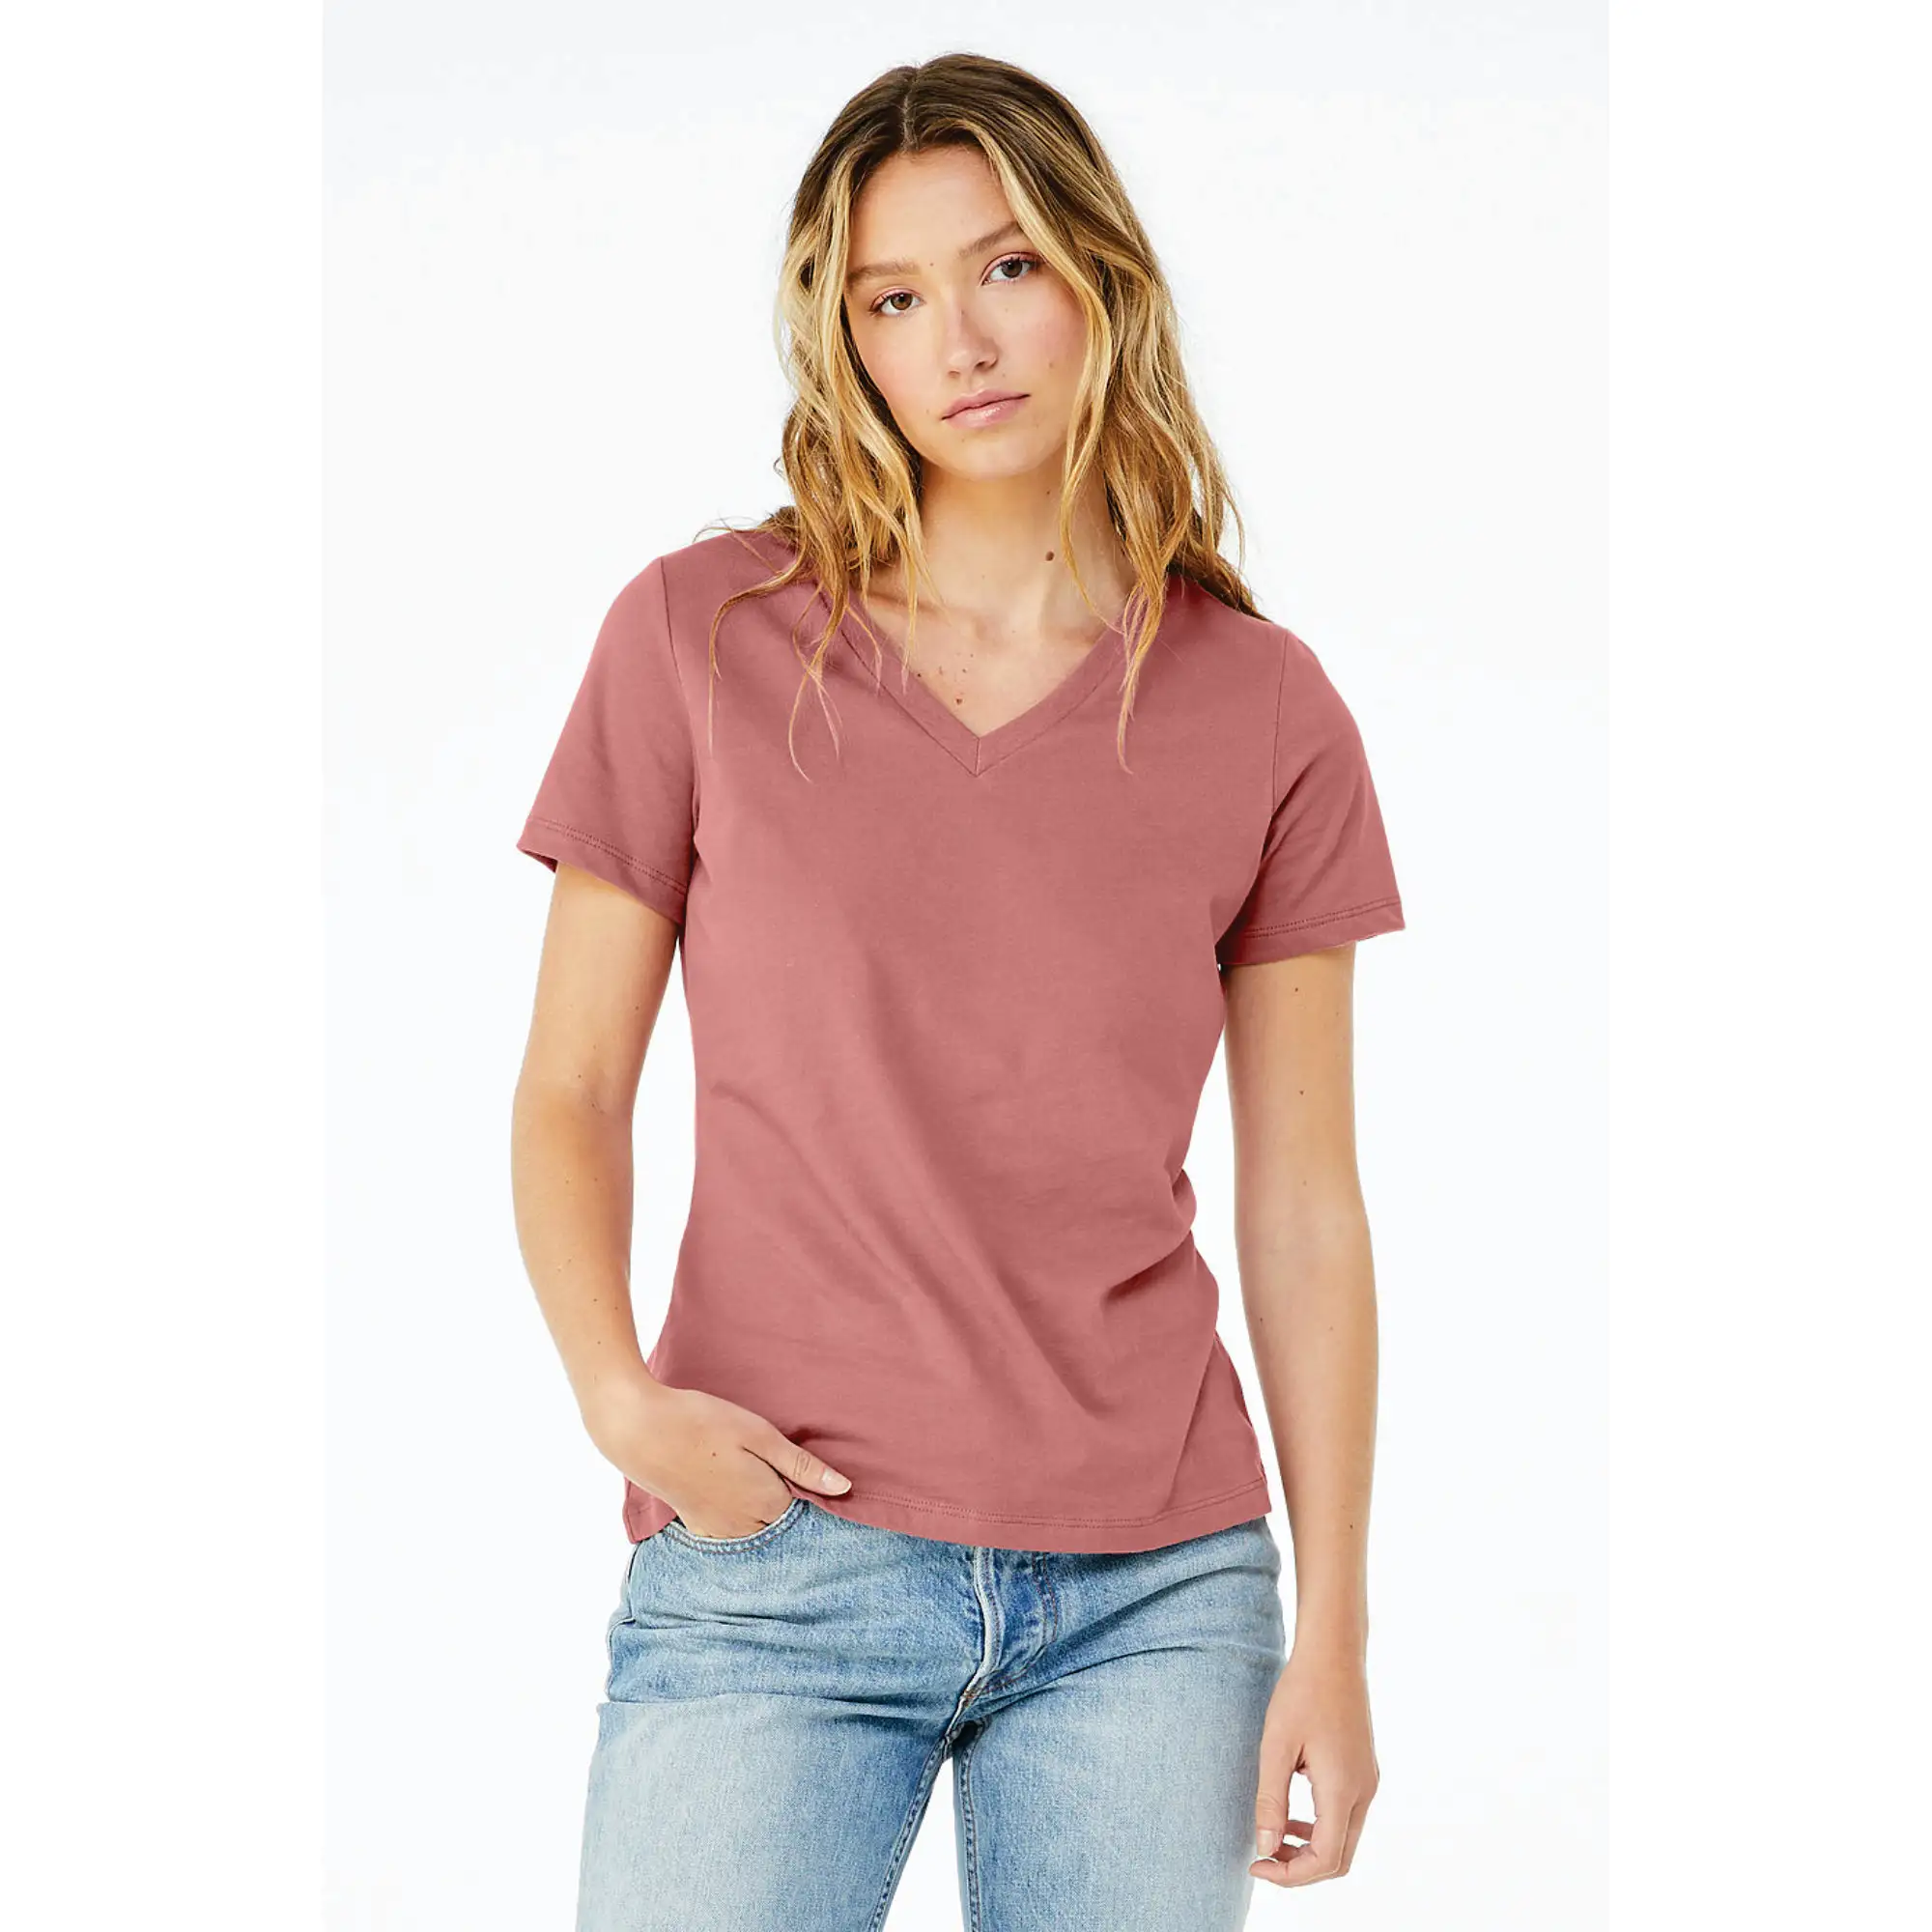 100% Airlume Combed and Ring Spun Cotton 32 Single 4.2 oz Mauve Womens Relaxed Jersey Short Sleeve V-Neck T-Shirt